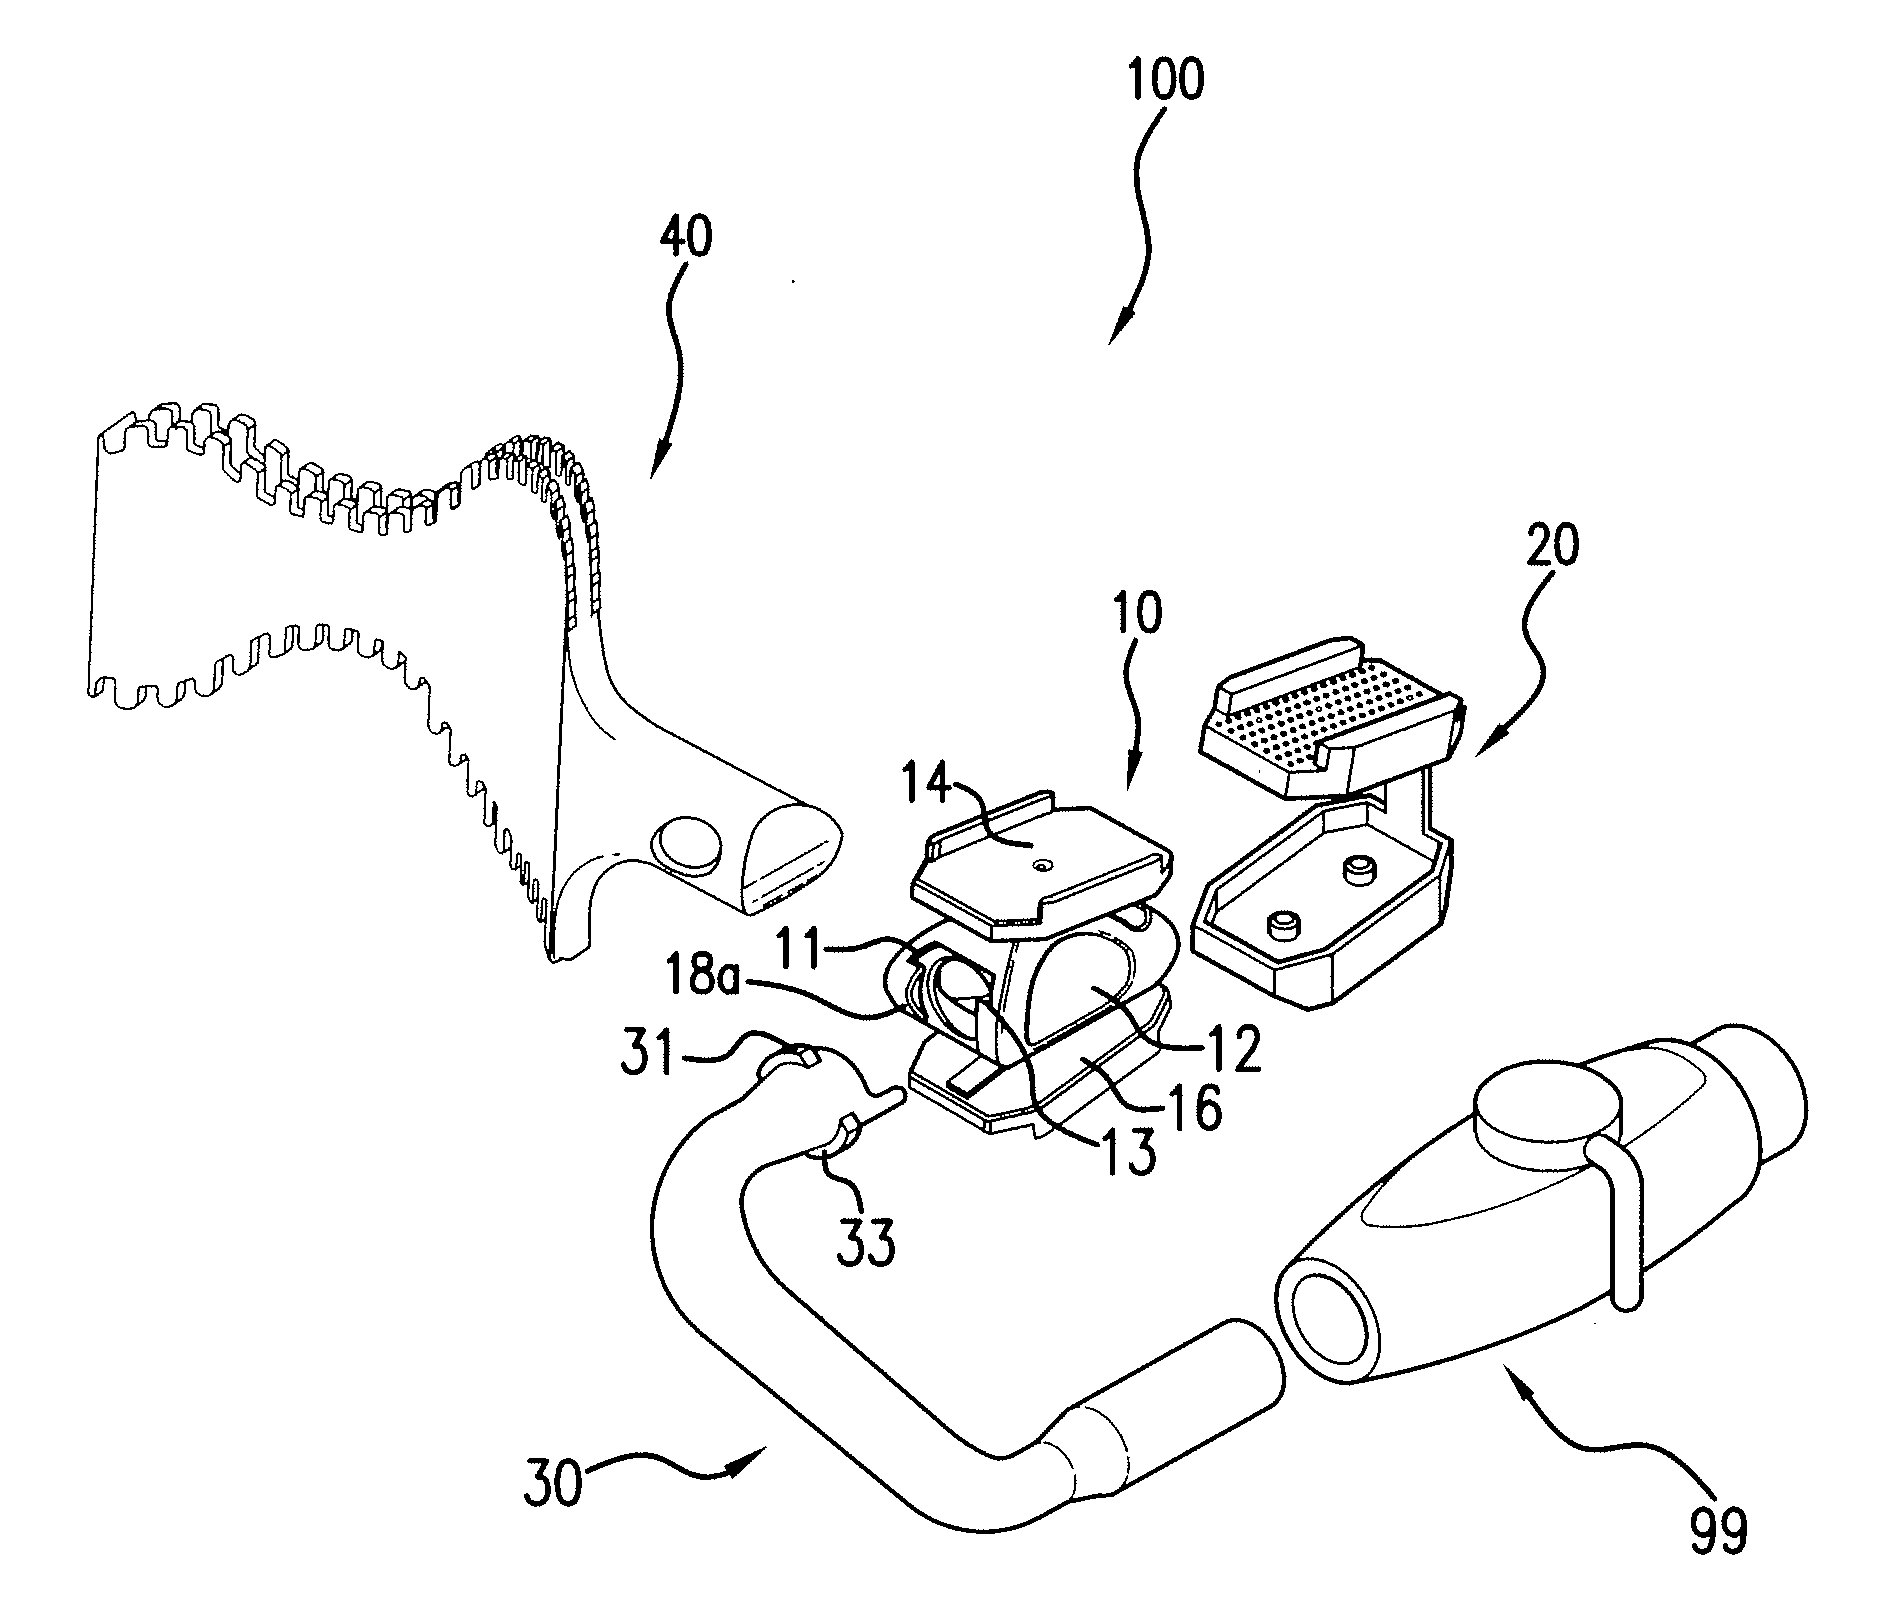 Intra-oral device and method